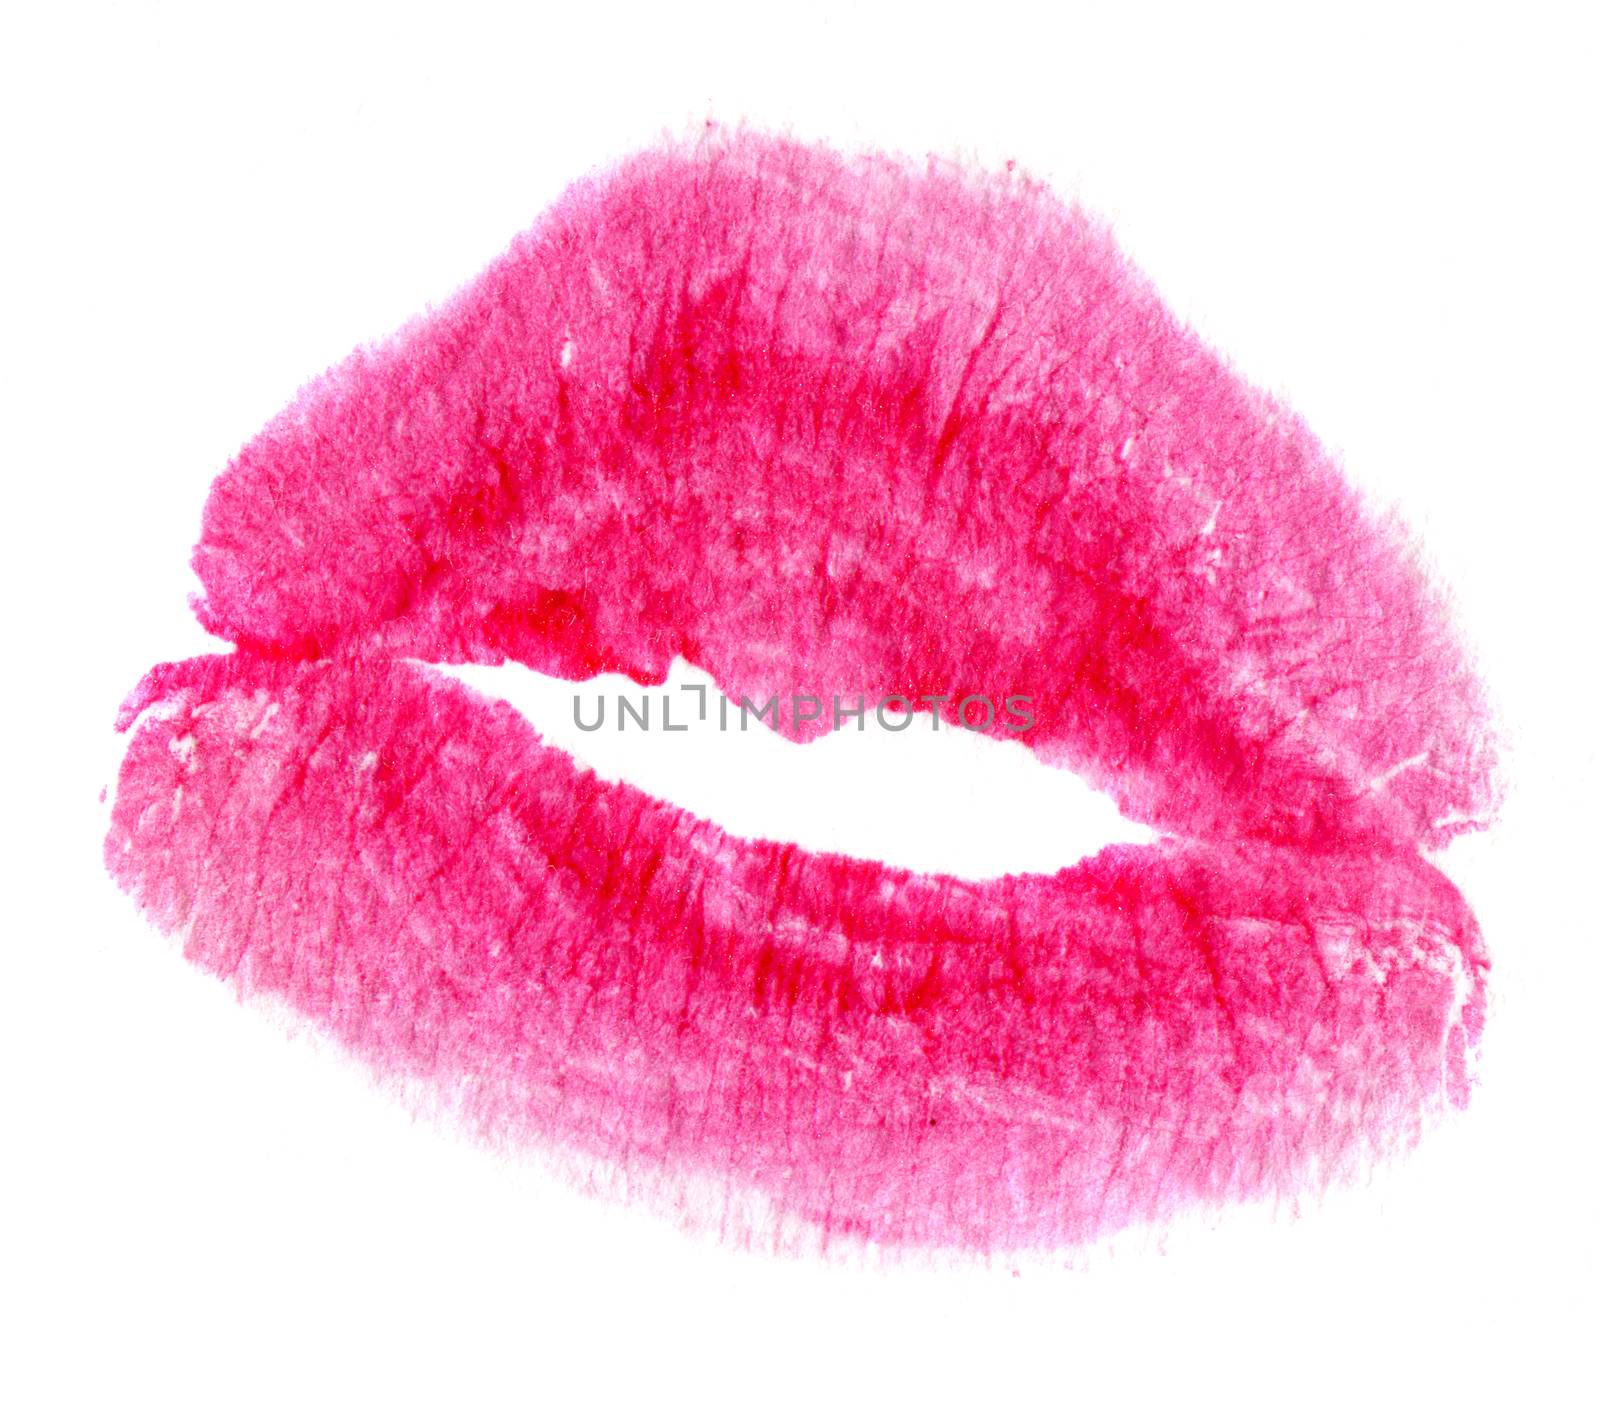 Woman's kiss stamp on a white background